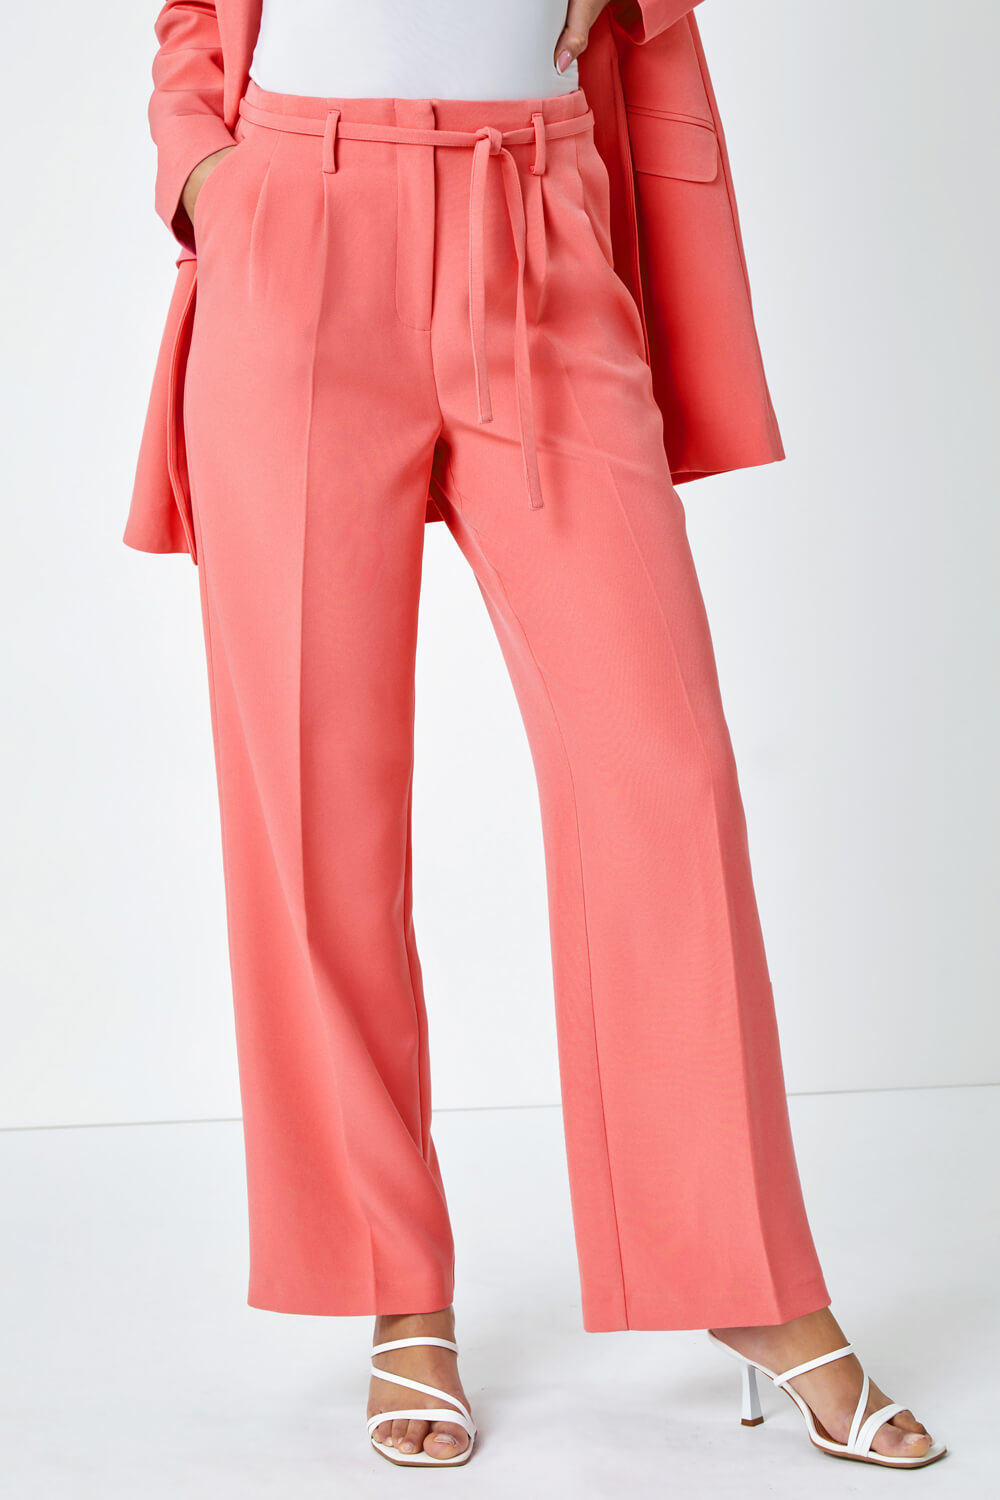 CORAL Crepe Stretch Straight Leg Trousers, Image 4 of 5